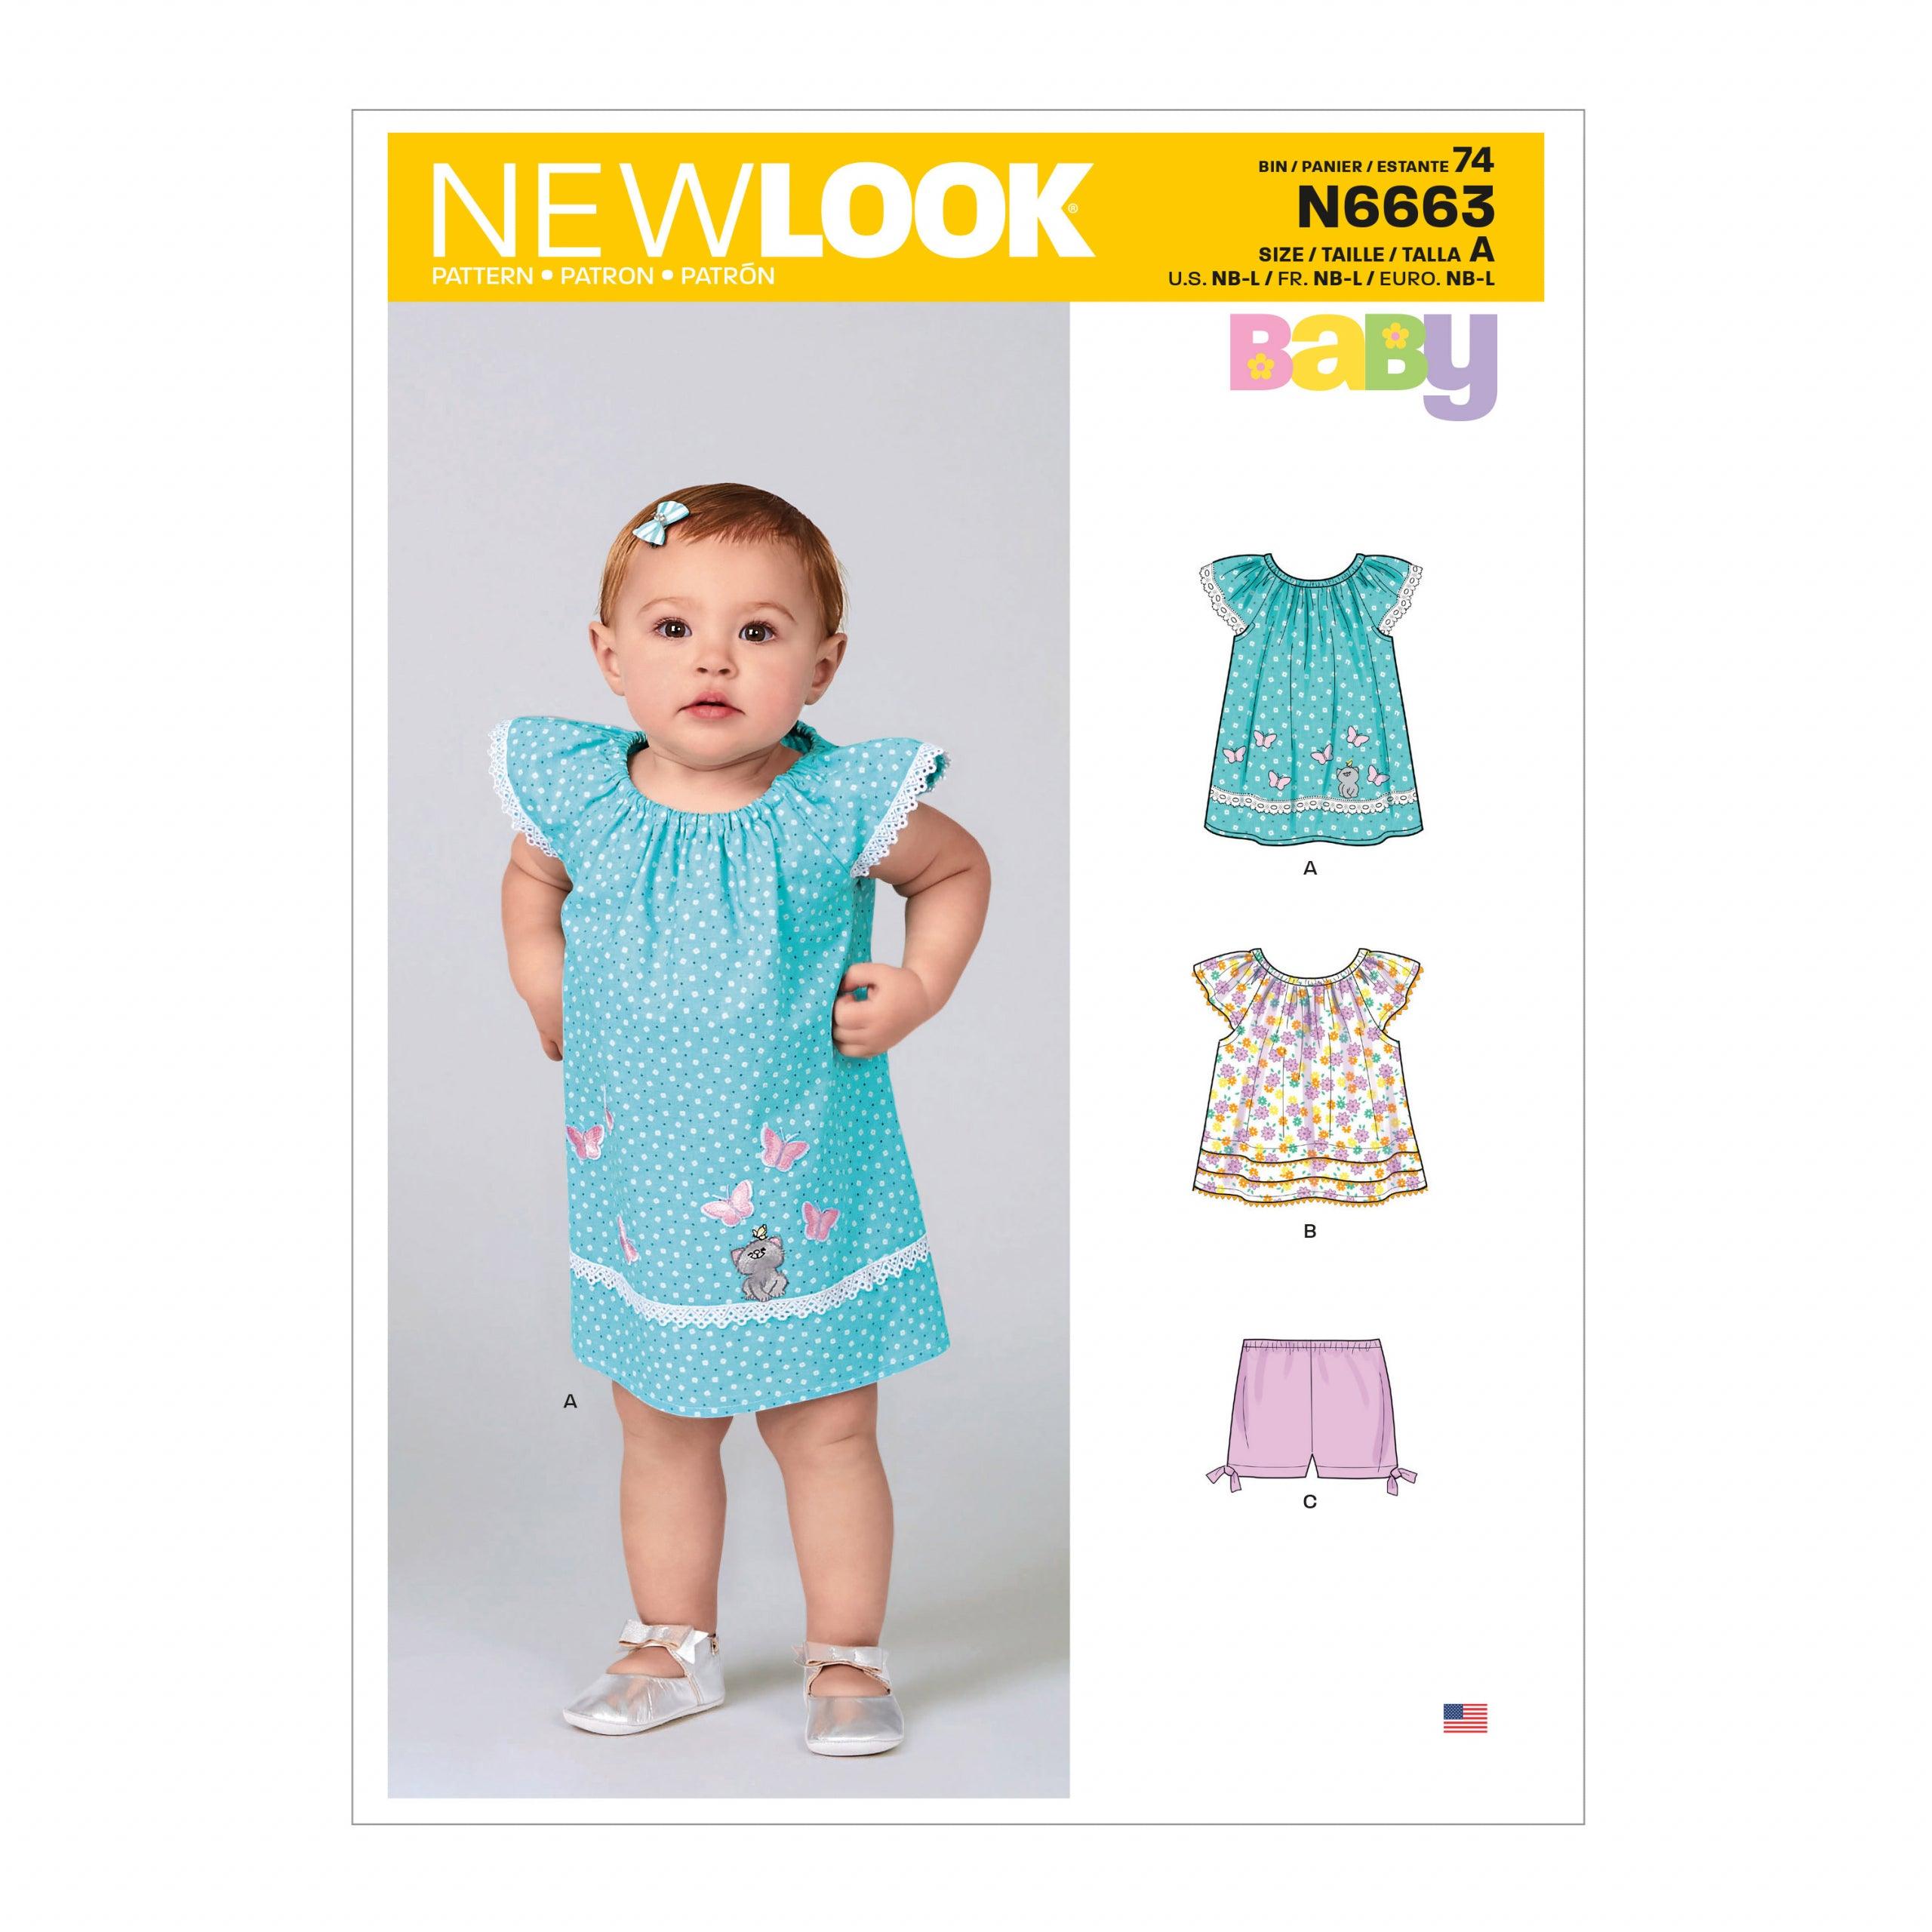 New Look N6663 Infants Dress, Top and Shorts